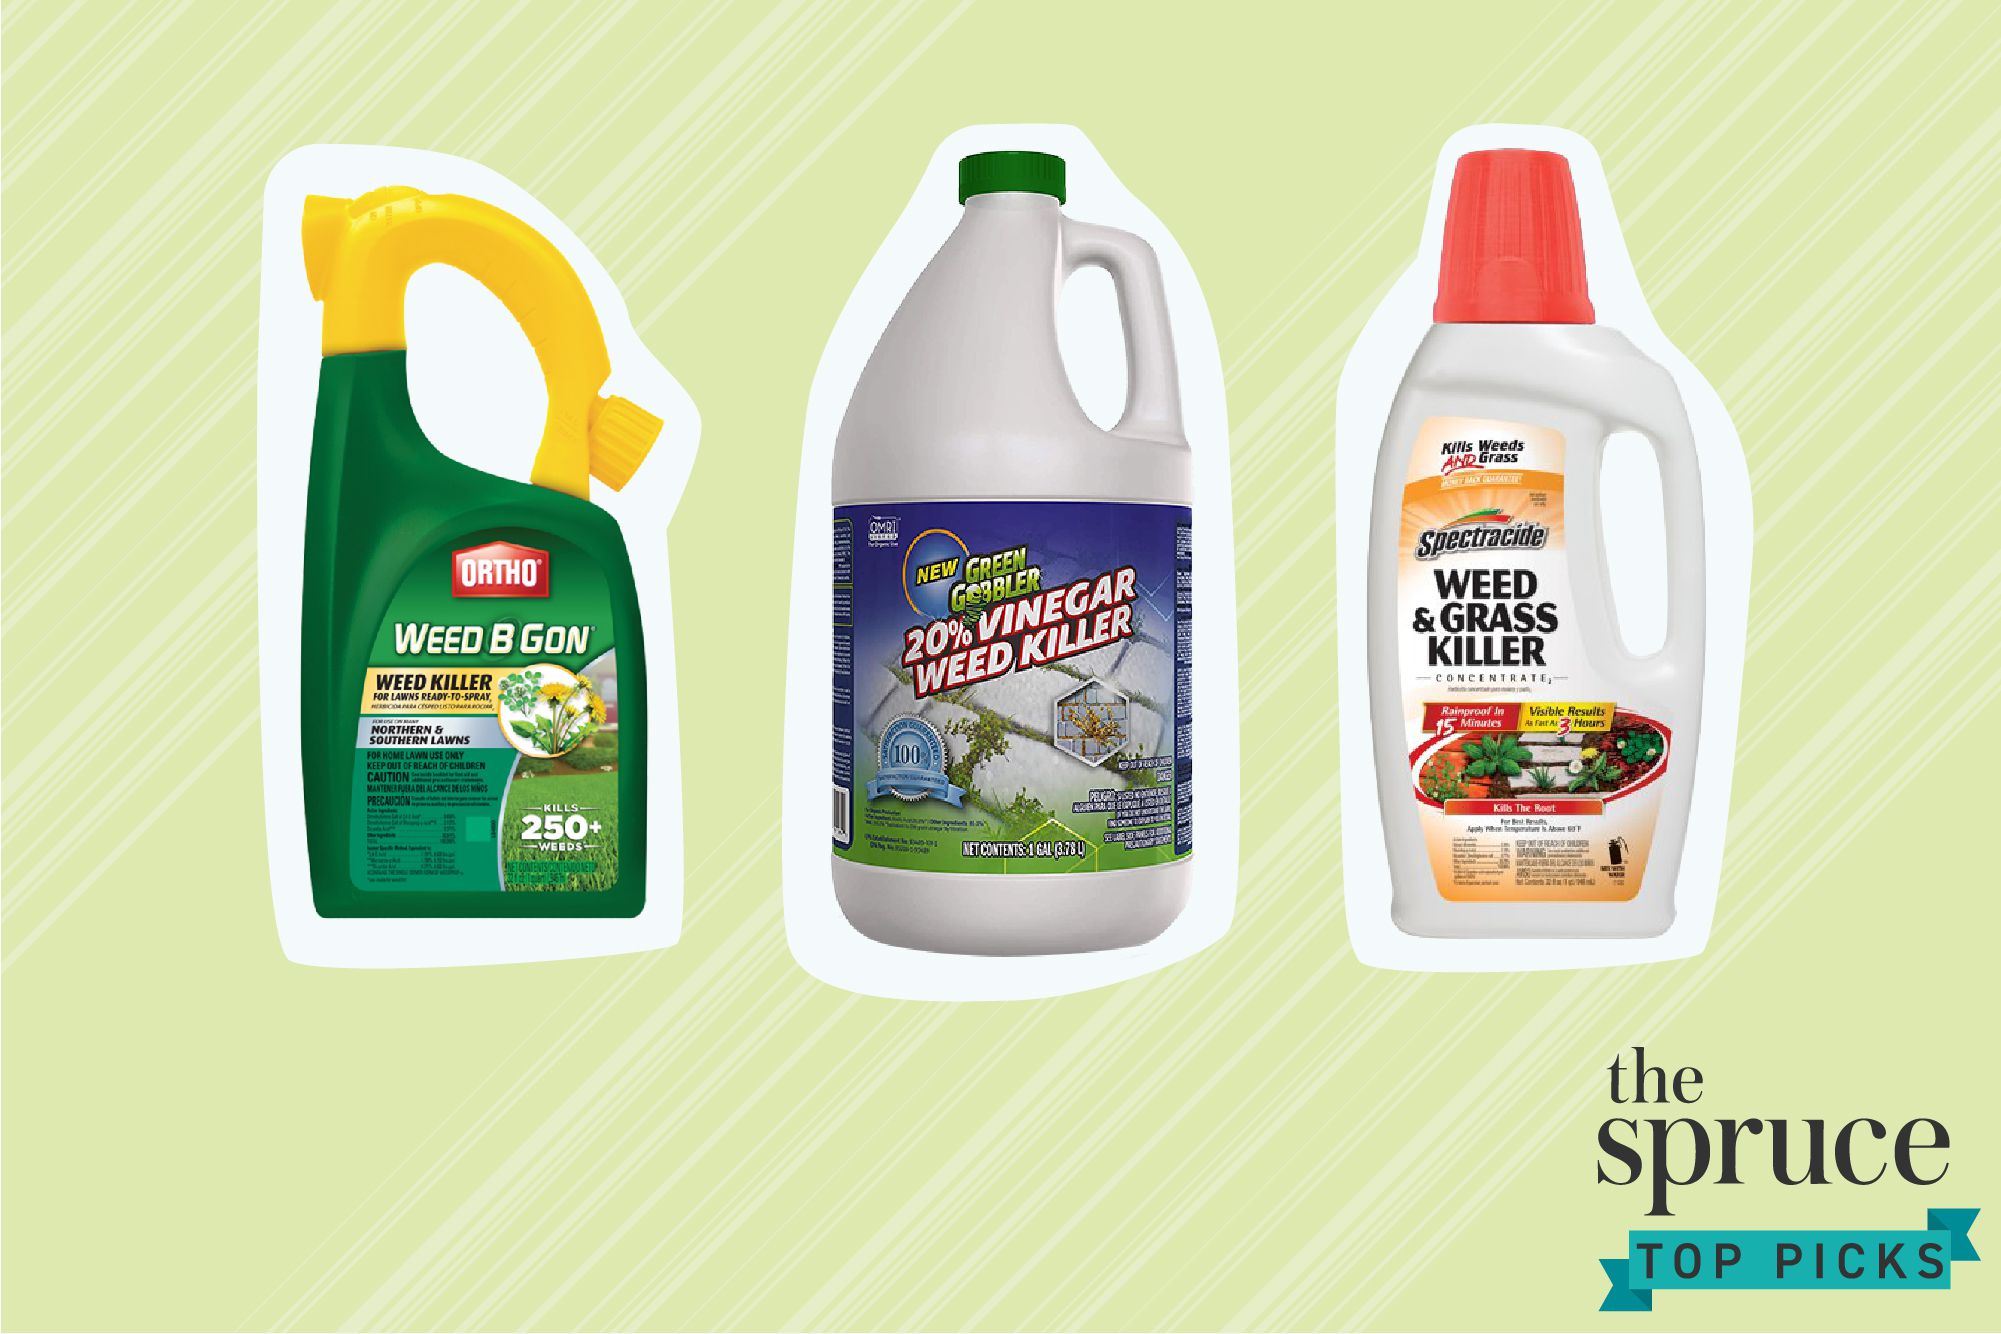 Eliminate Pesky Plants With These Top-Rated Weed Killers